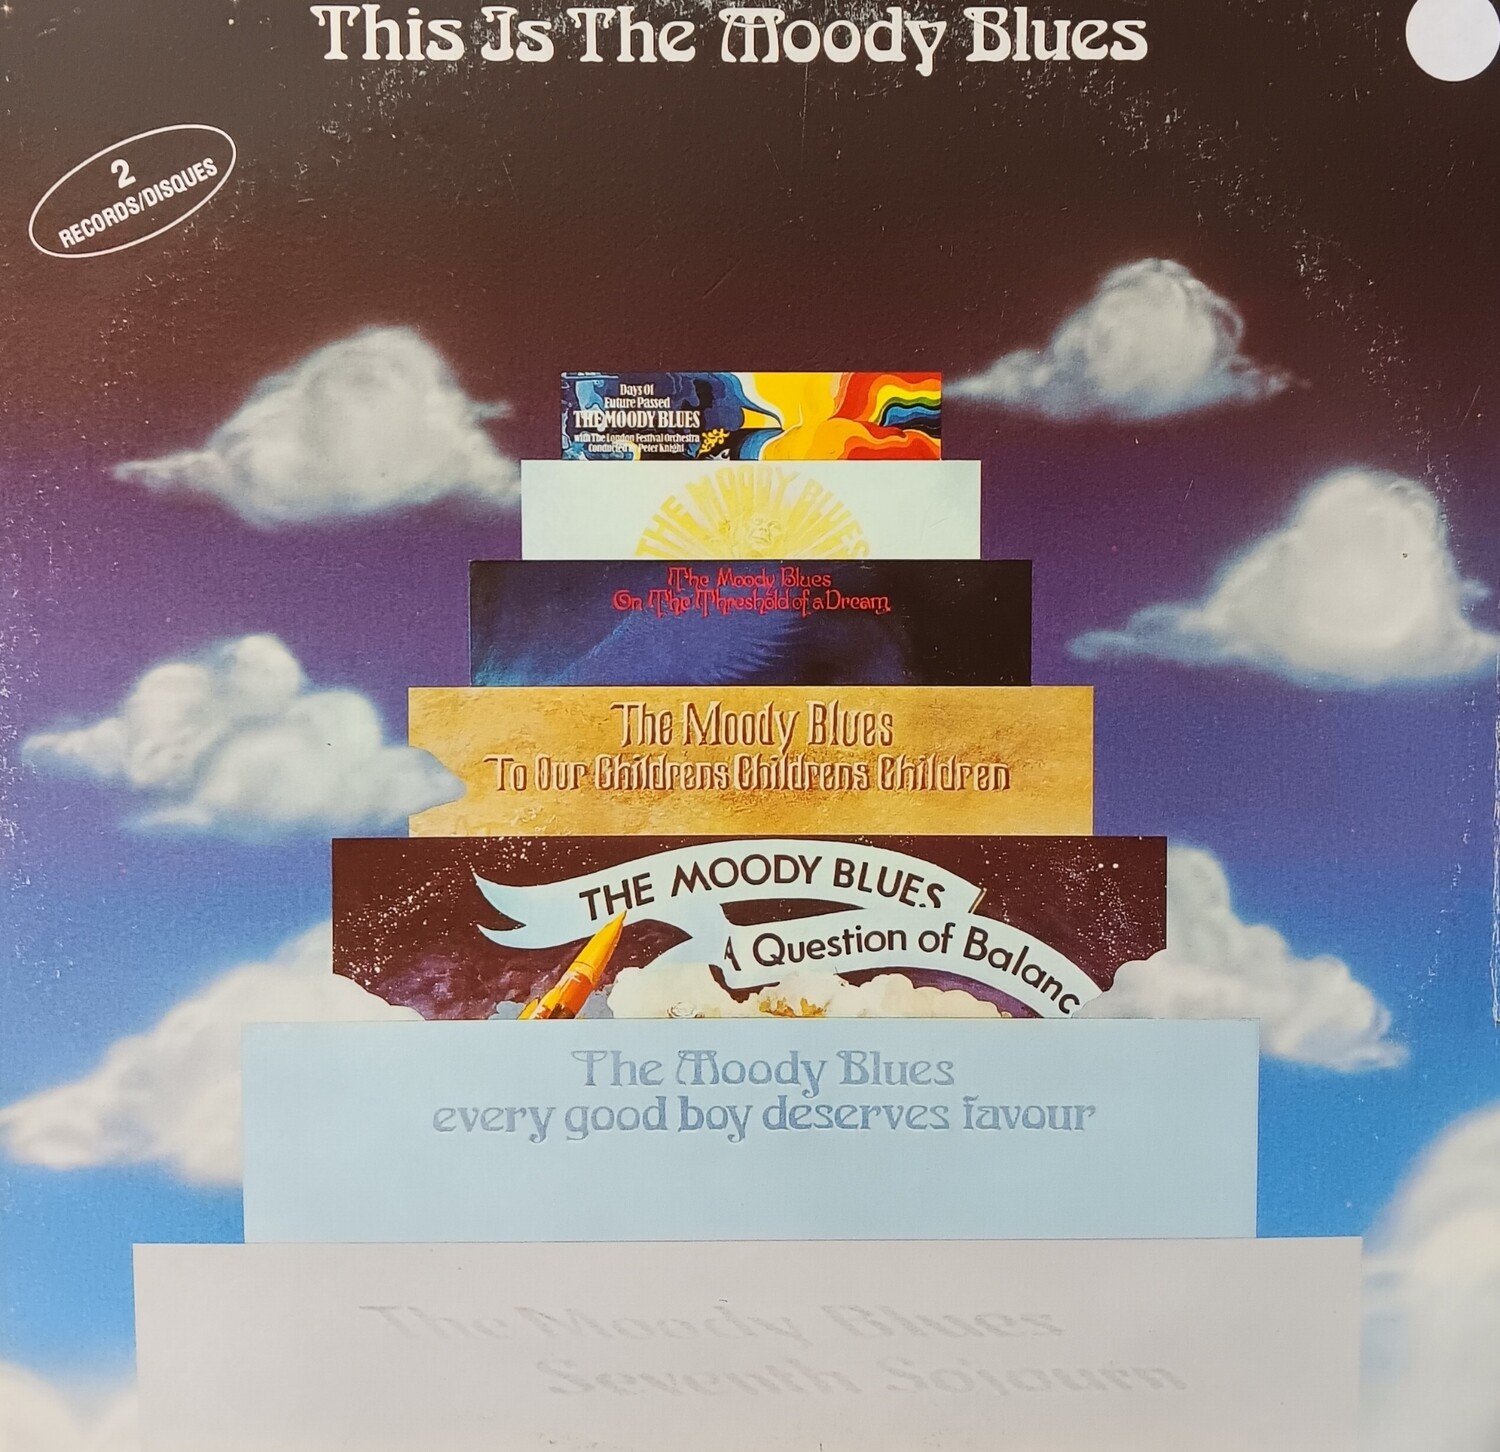 THE MOODY BLUES - This is The Moody Blues